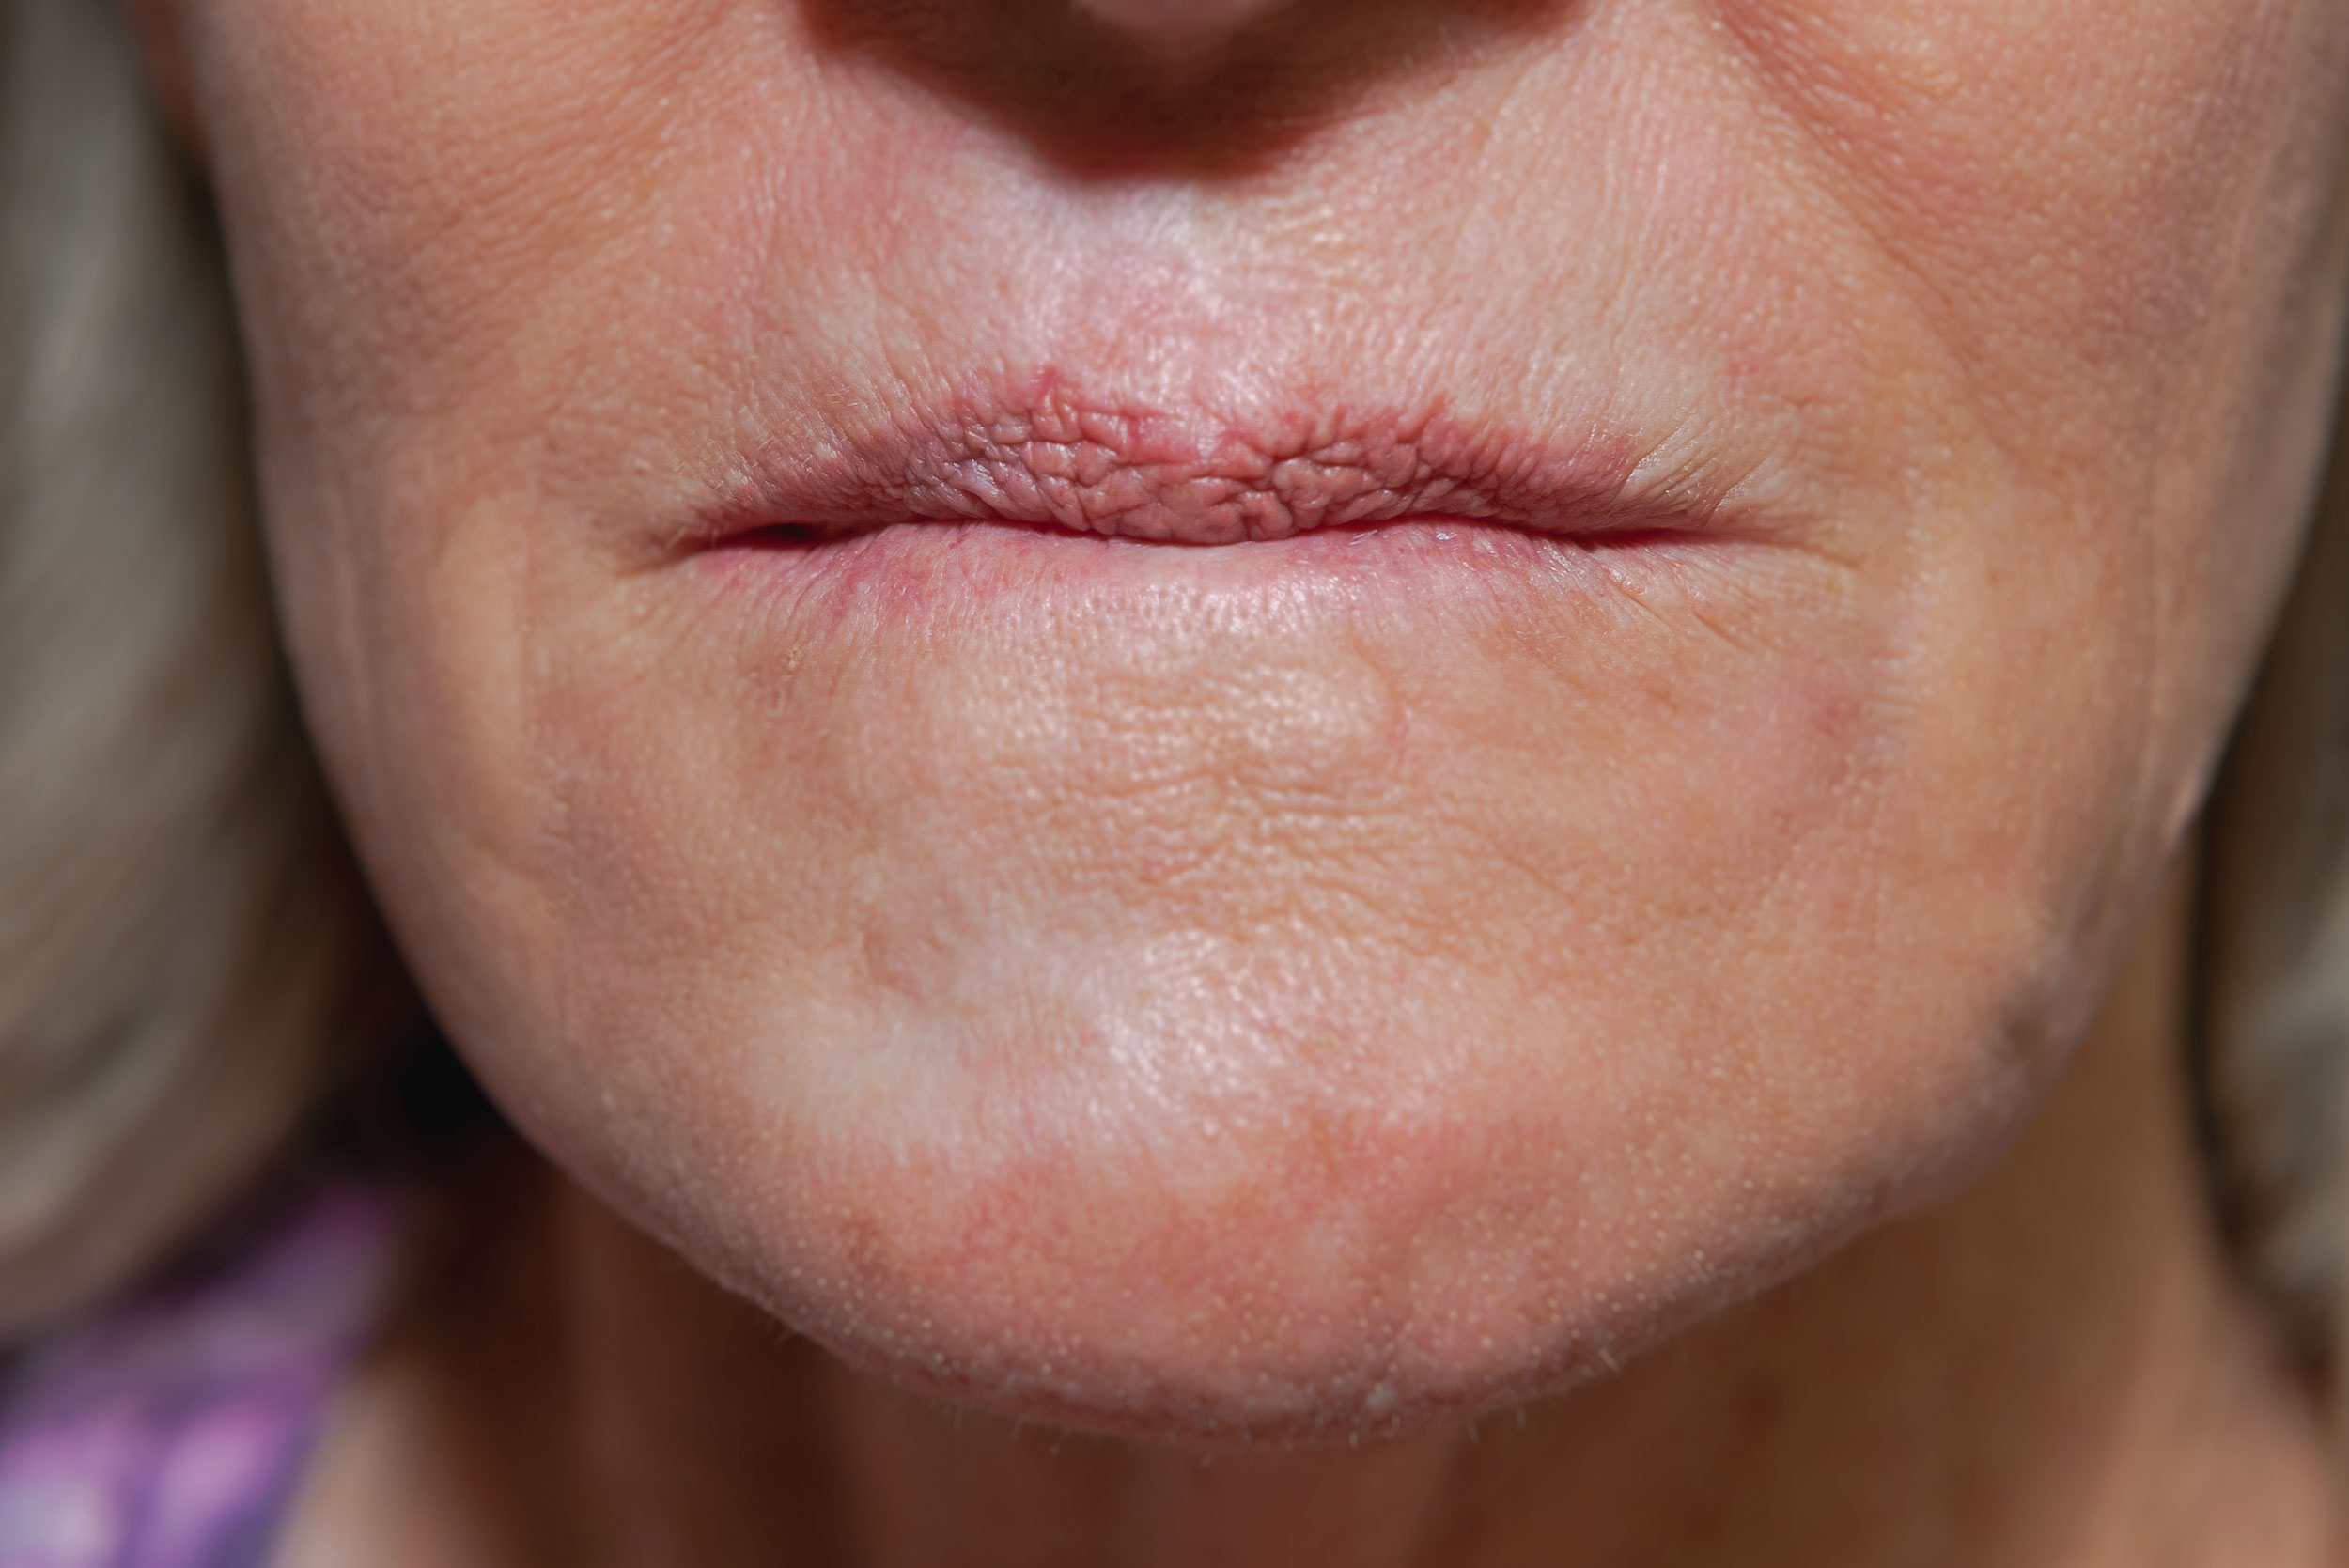 This young woman had several surgeries after a sporting accident caused severe damage to her lower face, especially her lips. The procedure took many applicatons to break through the thick scarring to create these pretty new lips. Perseverance and multiple treatments over 6 months to a year are necessary to minimze facial scarring. The face and scalp react better than the rest of the body due to the thickness, moisture and oil from the neck up.